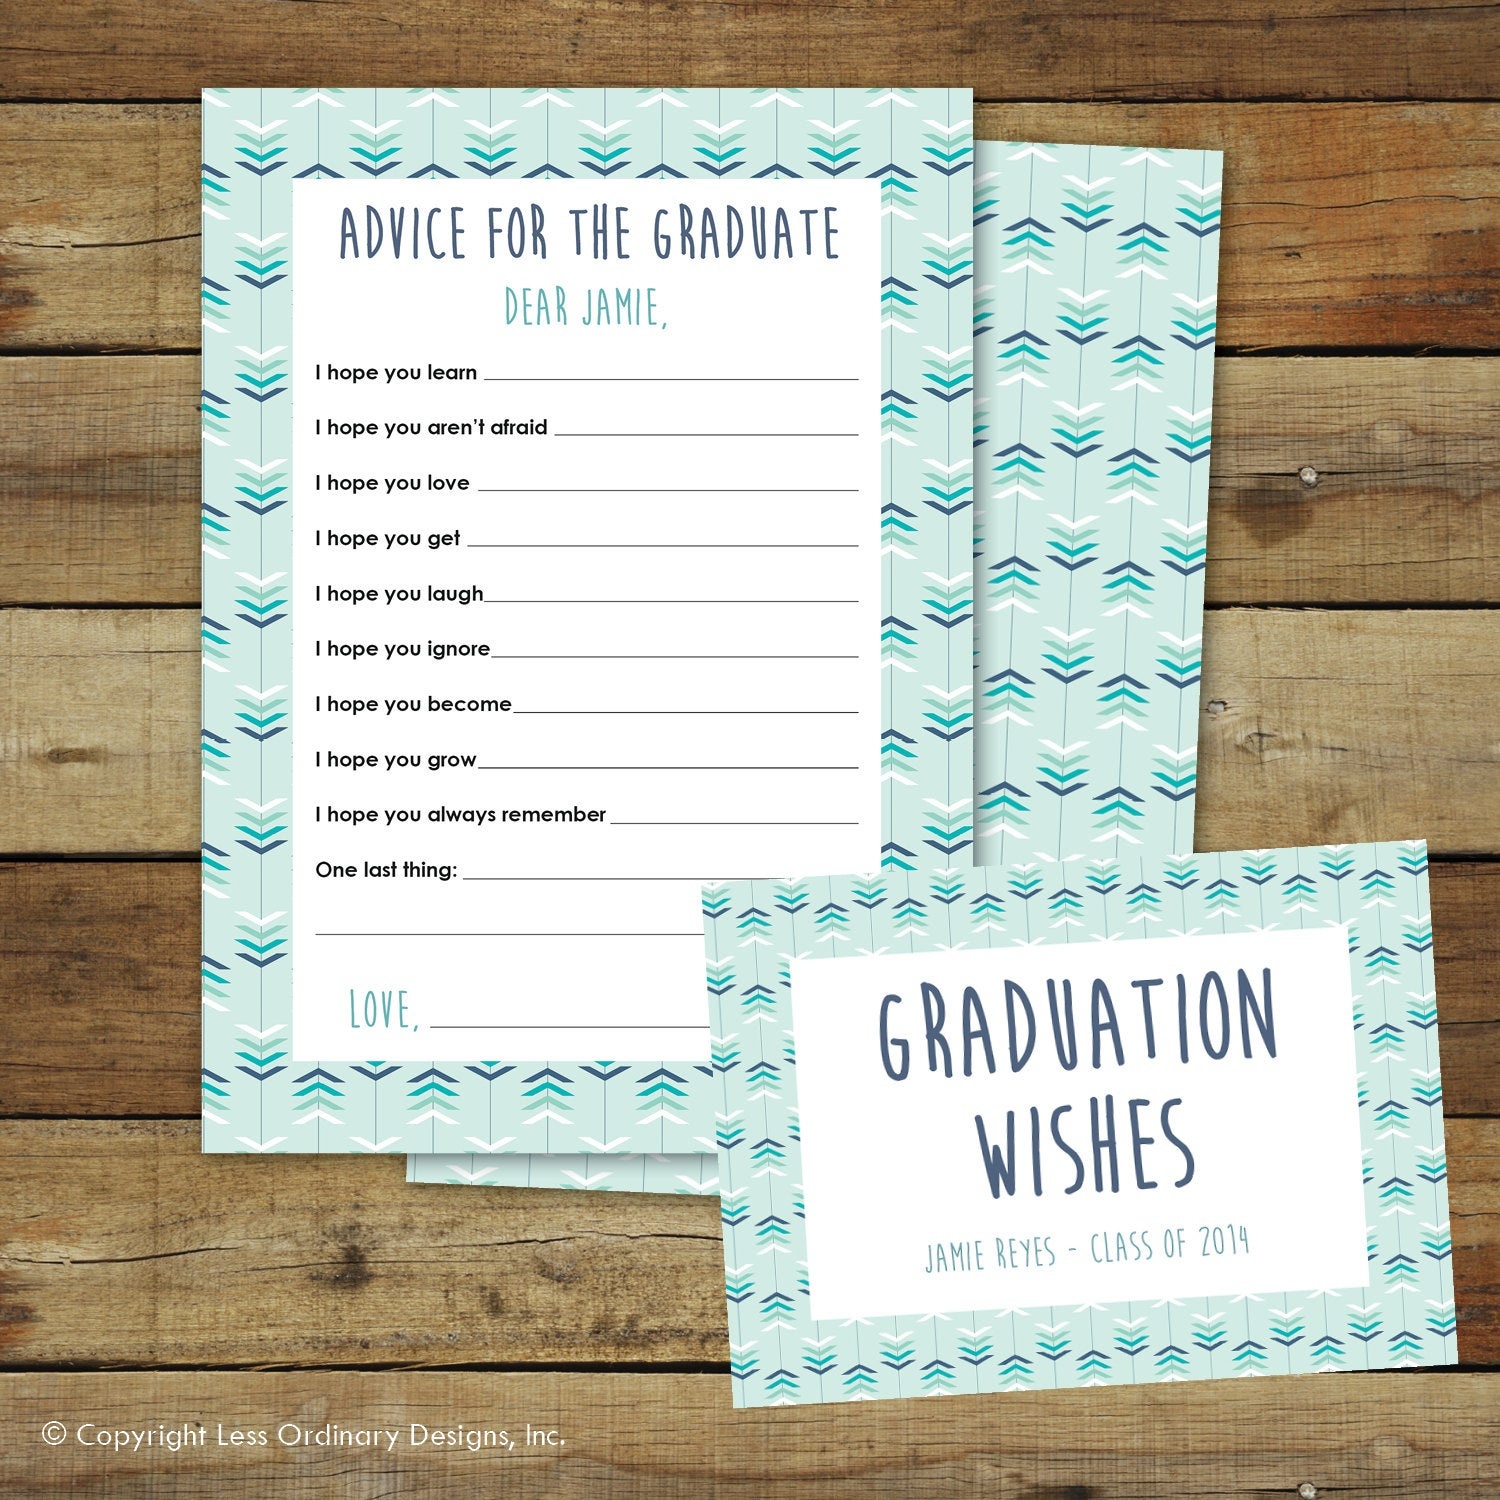 Graduation Wishes Advice Cards Printable Instant Download | Etsy - Free Printable Graduation Advice Cards